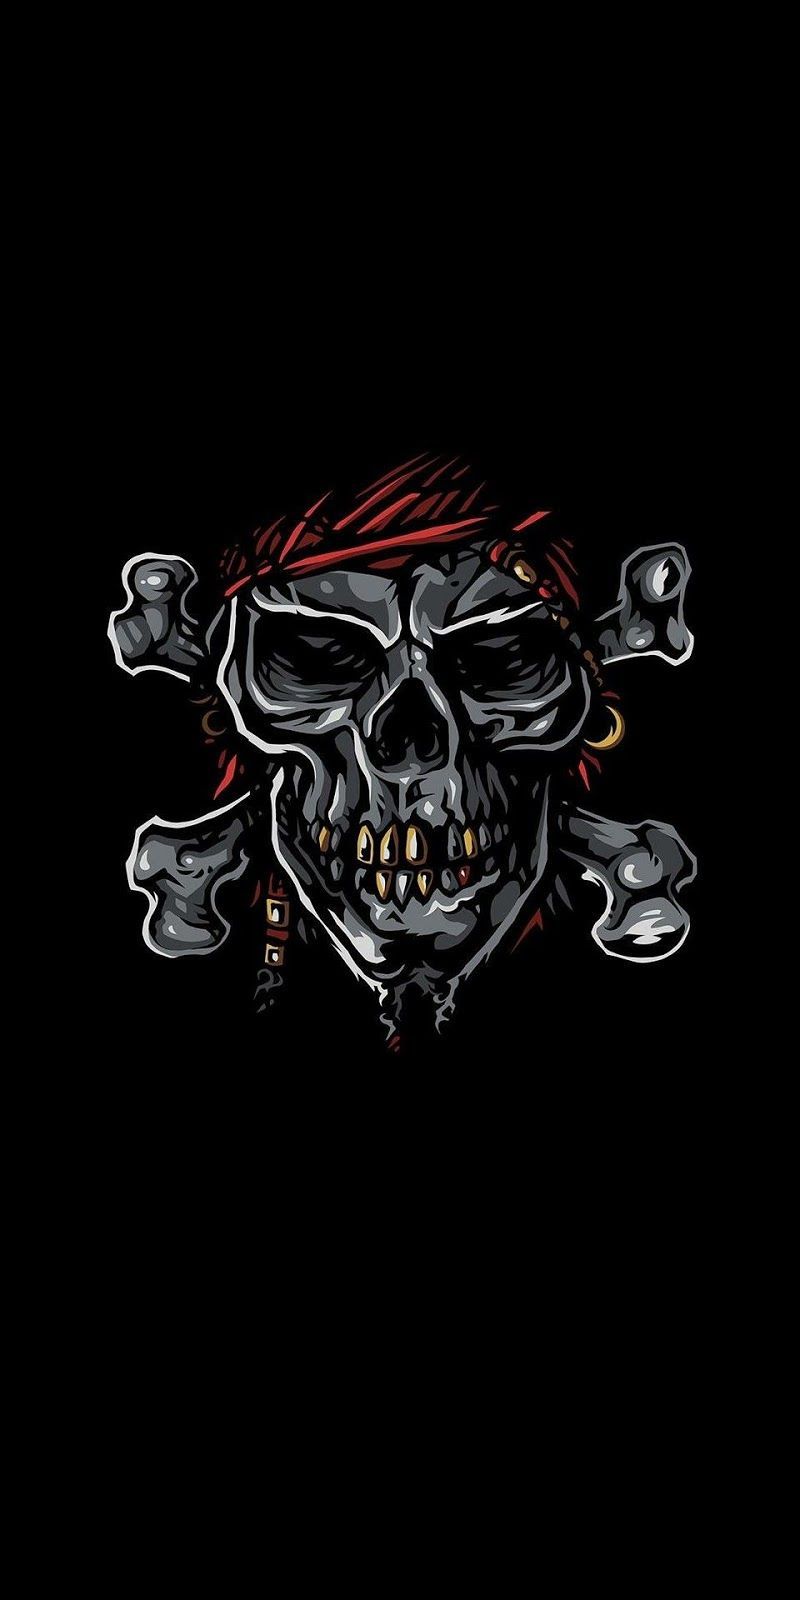 Best Wallpaper For Android and iOS. Skull wallpaper, HD